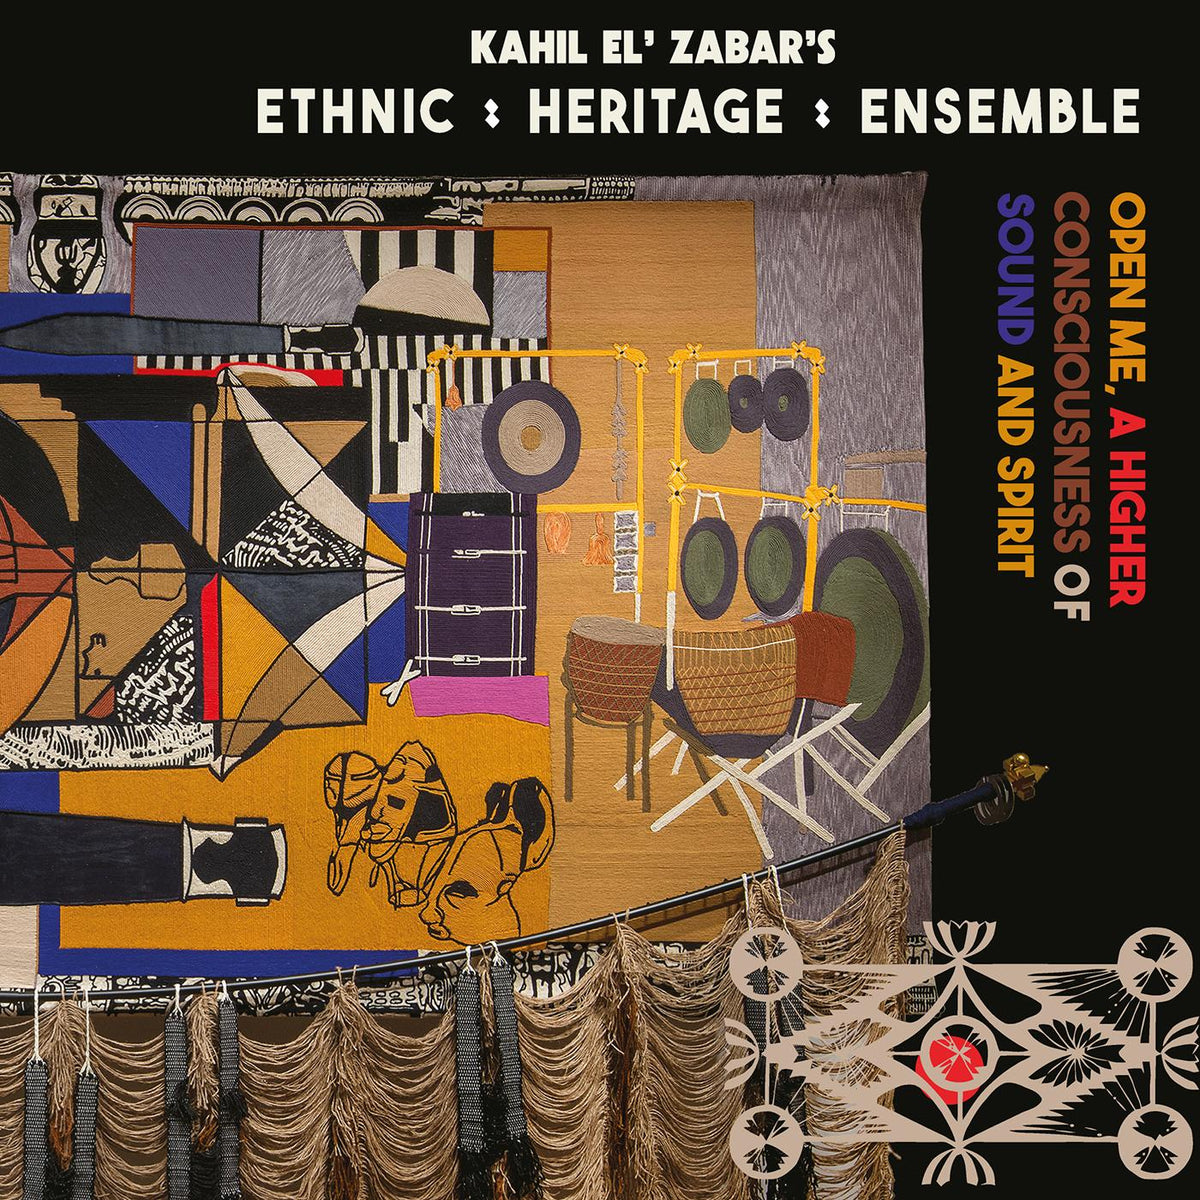 Ethnic Heritage Ensemble - Open Me, A Higher Consciousness of Sound and Spirit (DELUXE EDITION) - CD